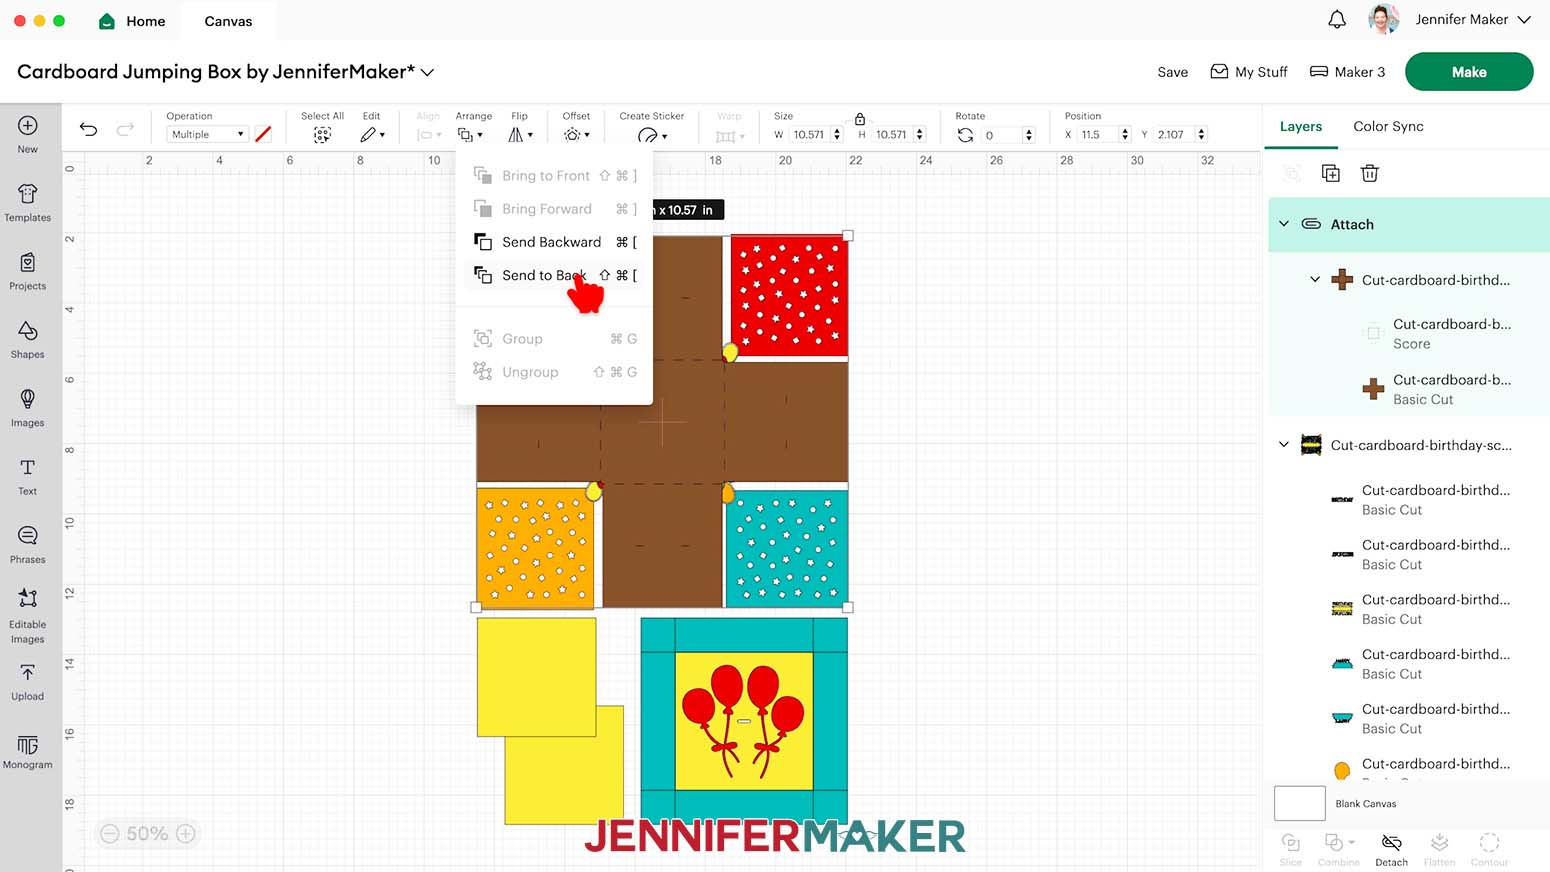 In Cricut Design Space, click Arrange and Send to Back to move the newly attached cardboard jumping box score and base layers to the back of the canvas